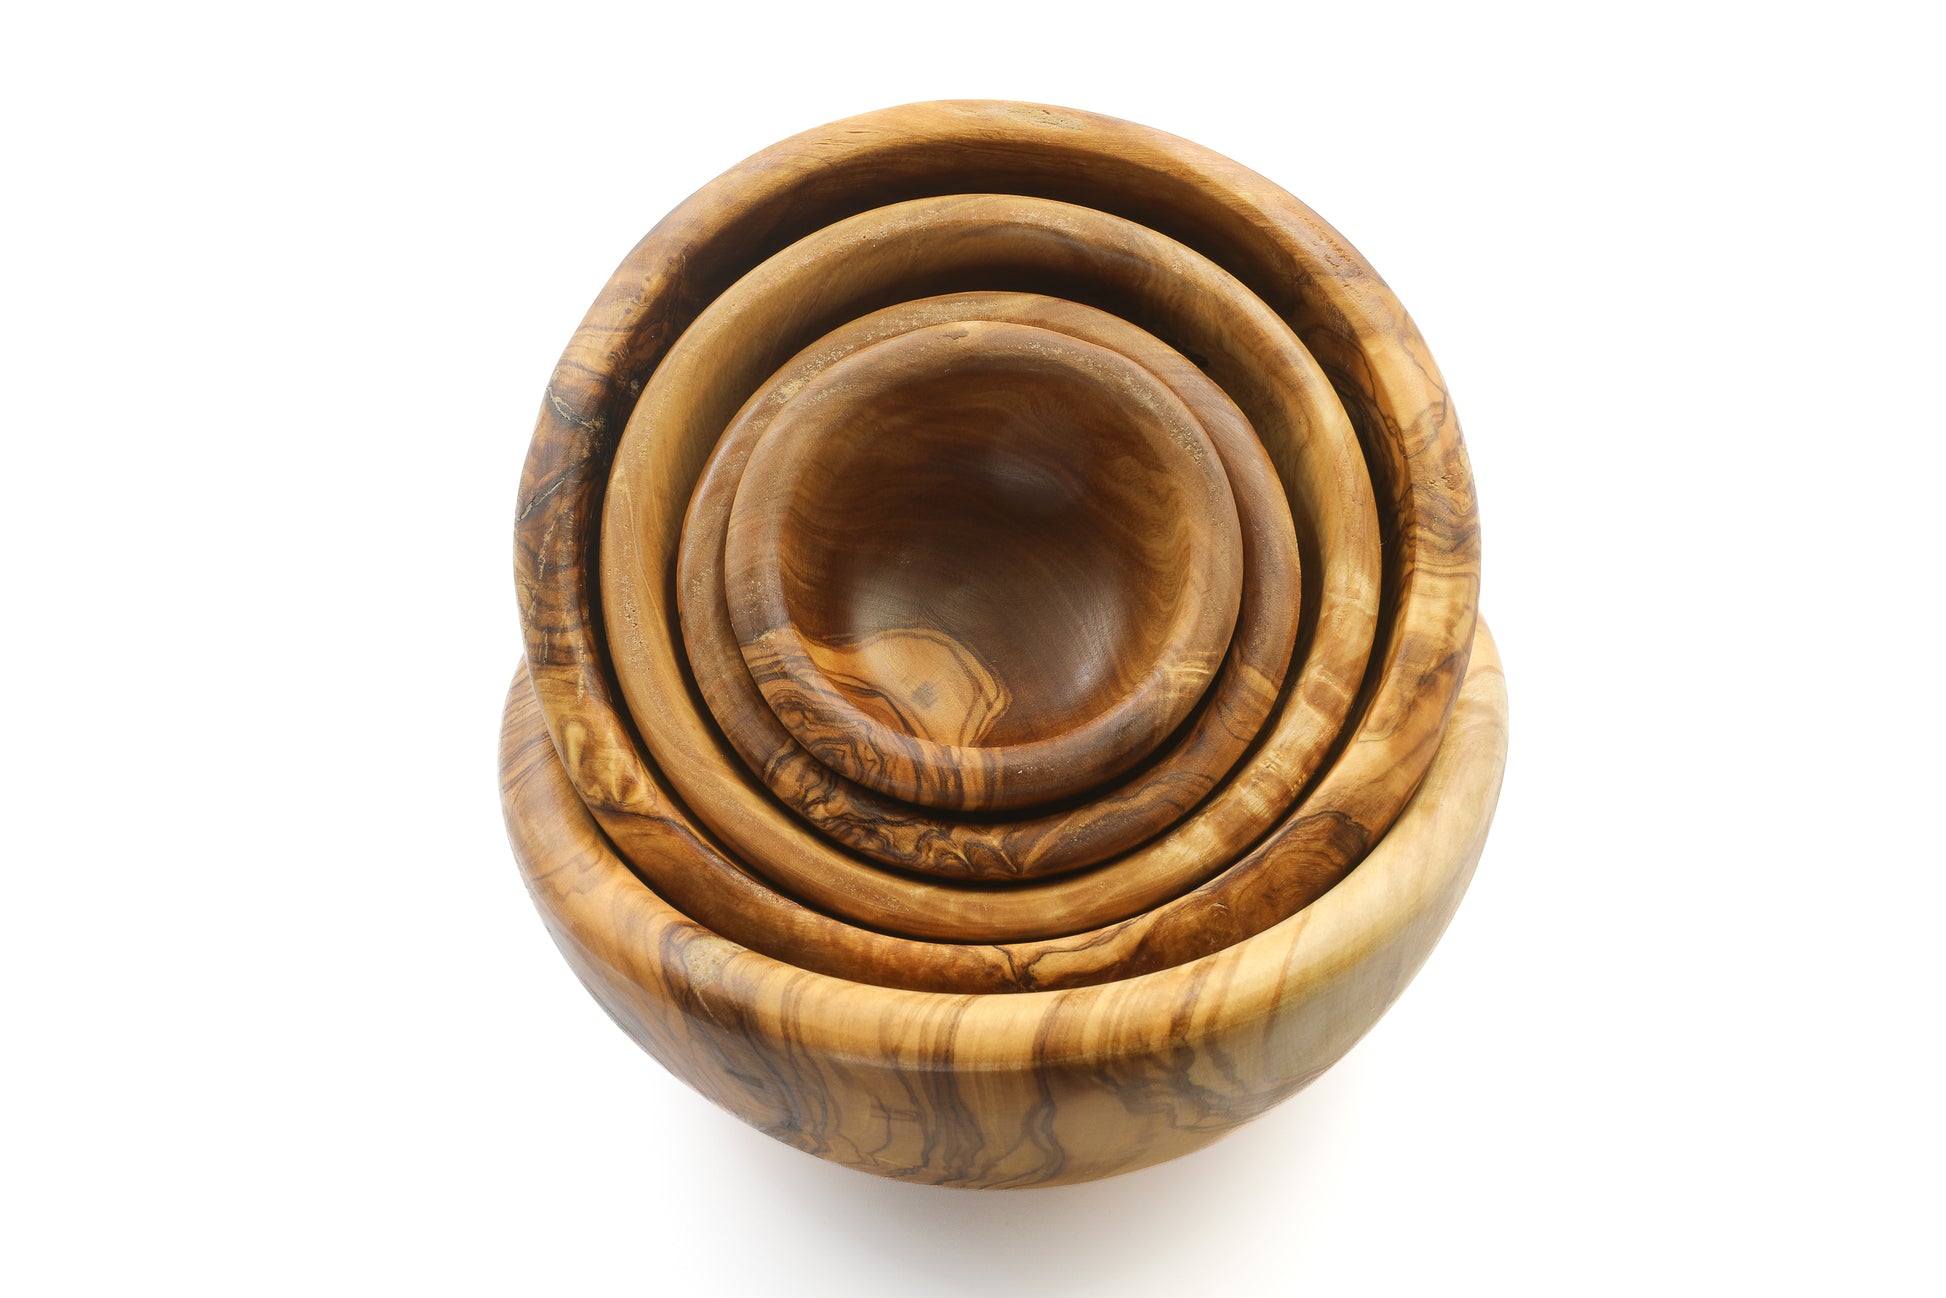 Olive wood bowls in a nesting set